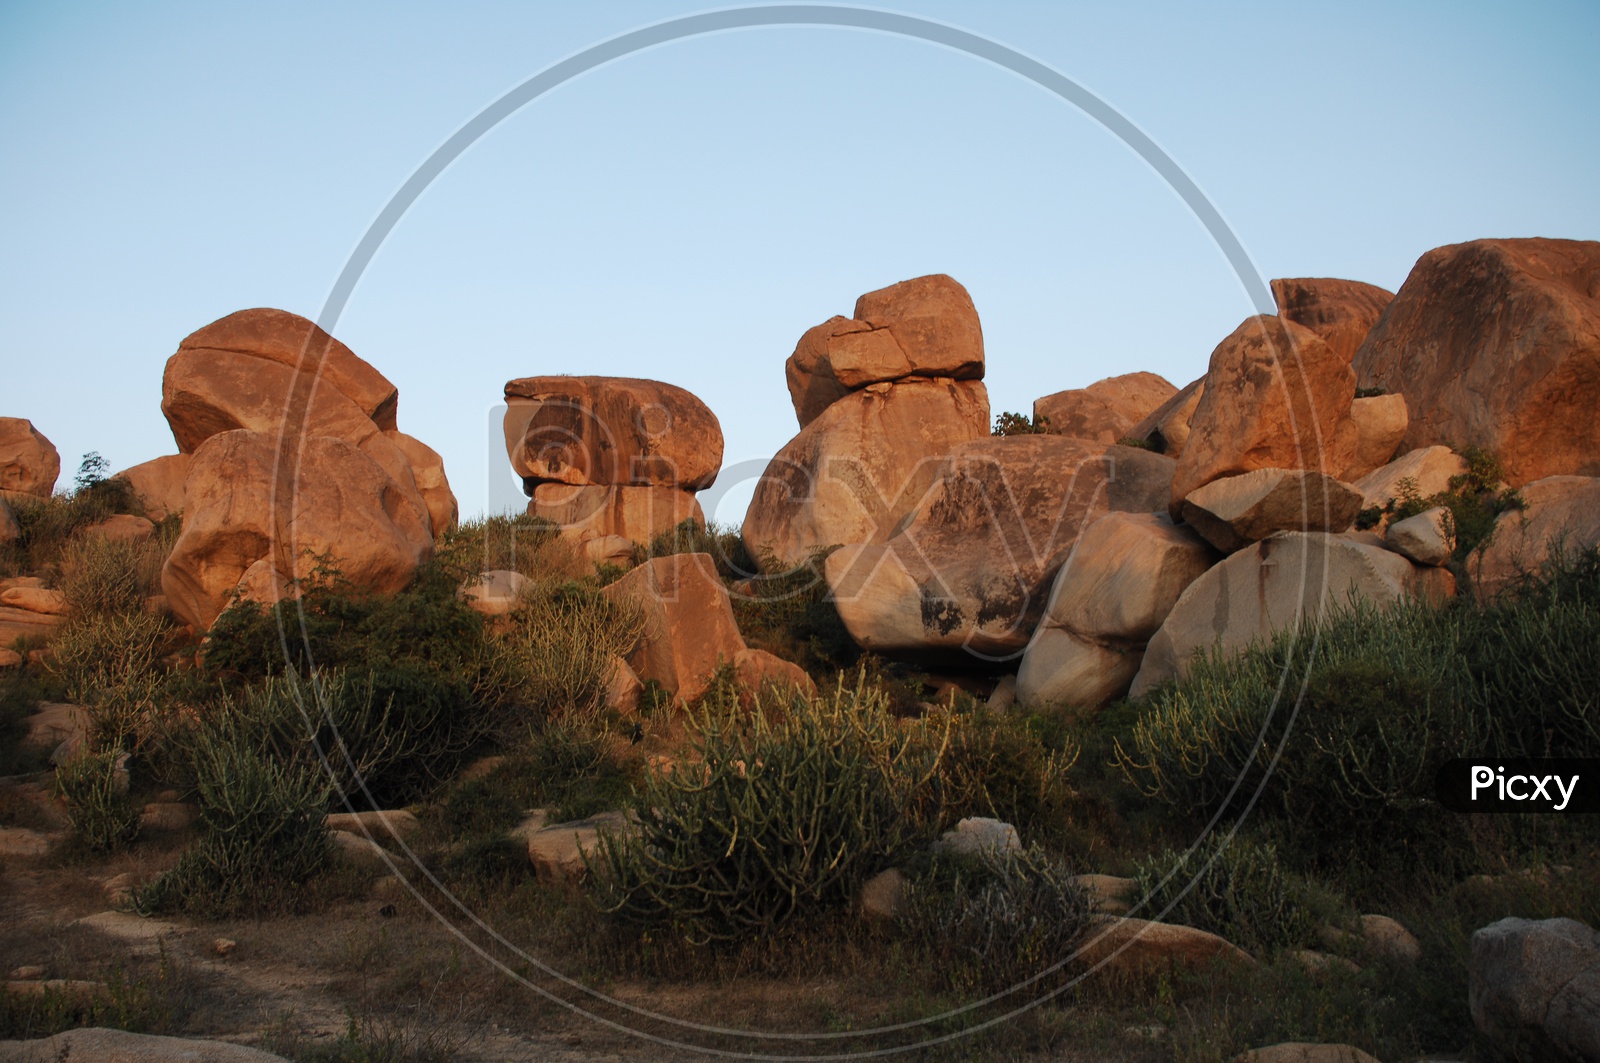 Massive Granite Boulders balancing on one another